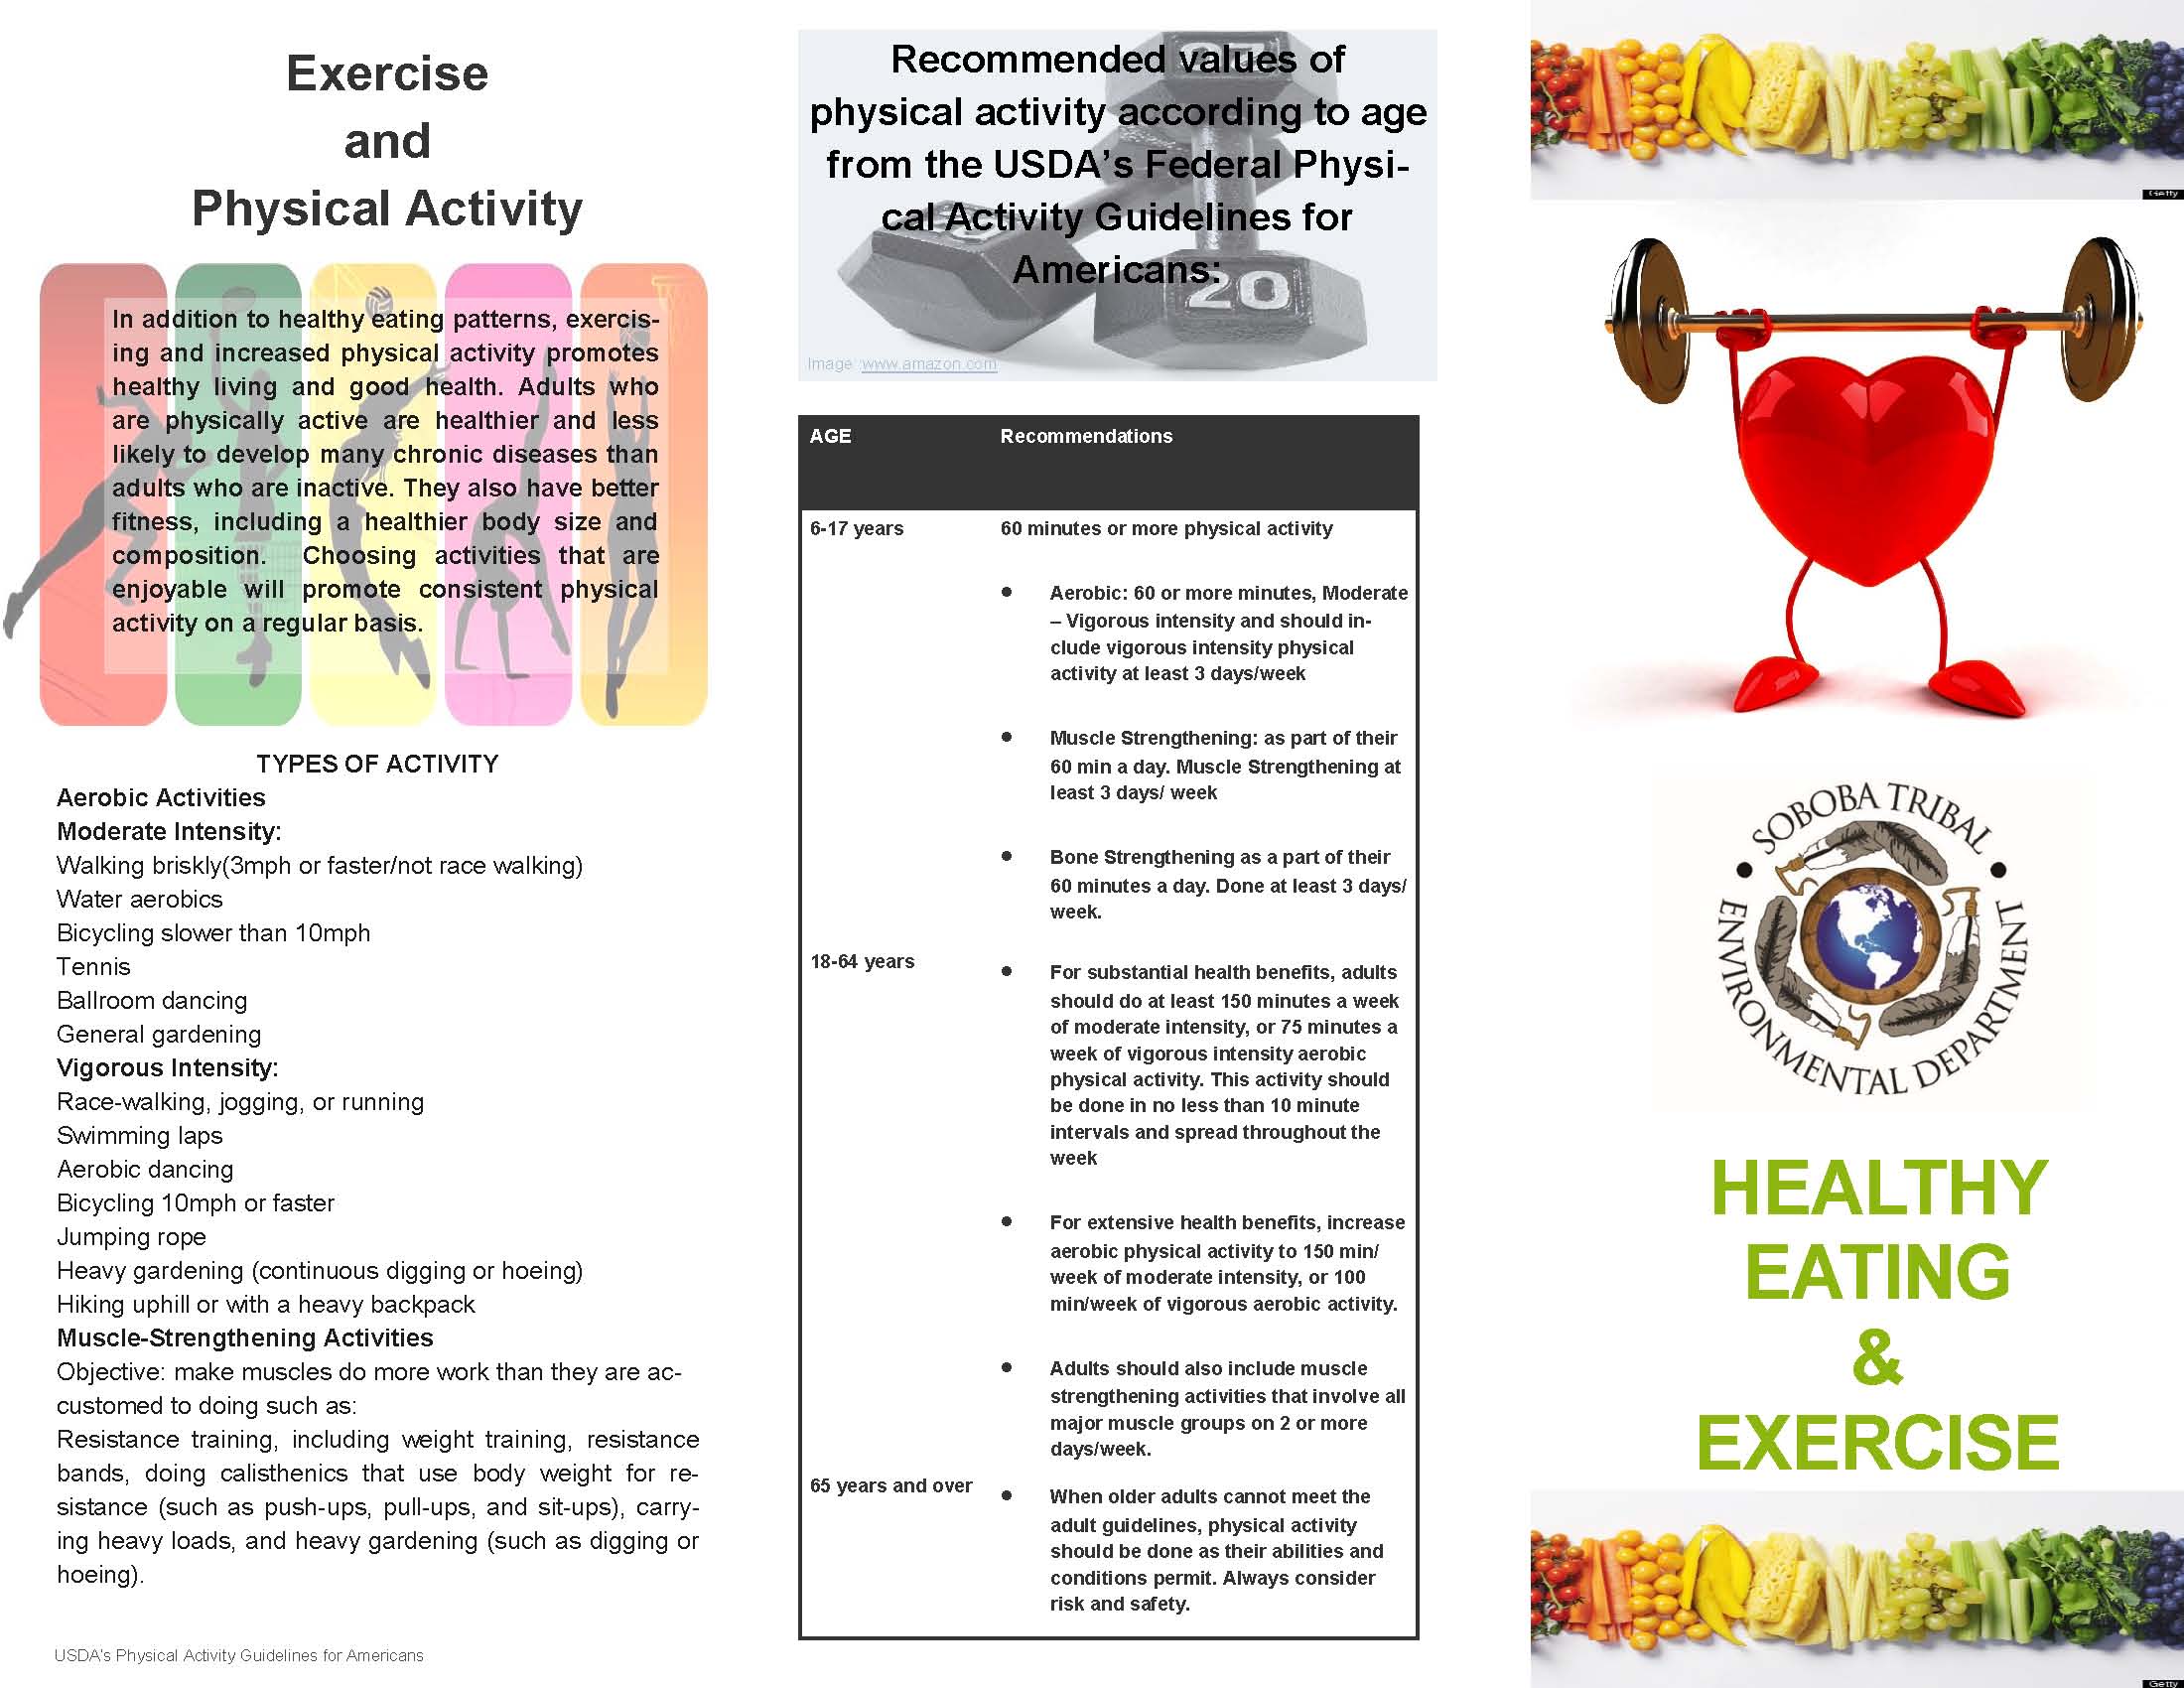 Healthy Eating & Exercise